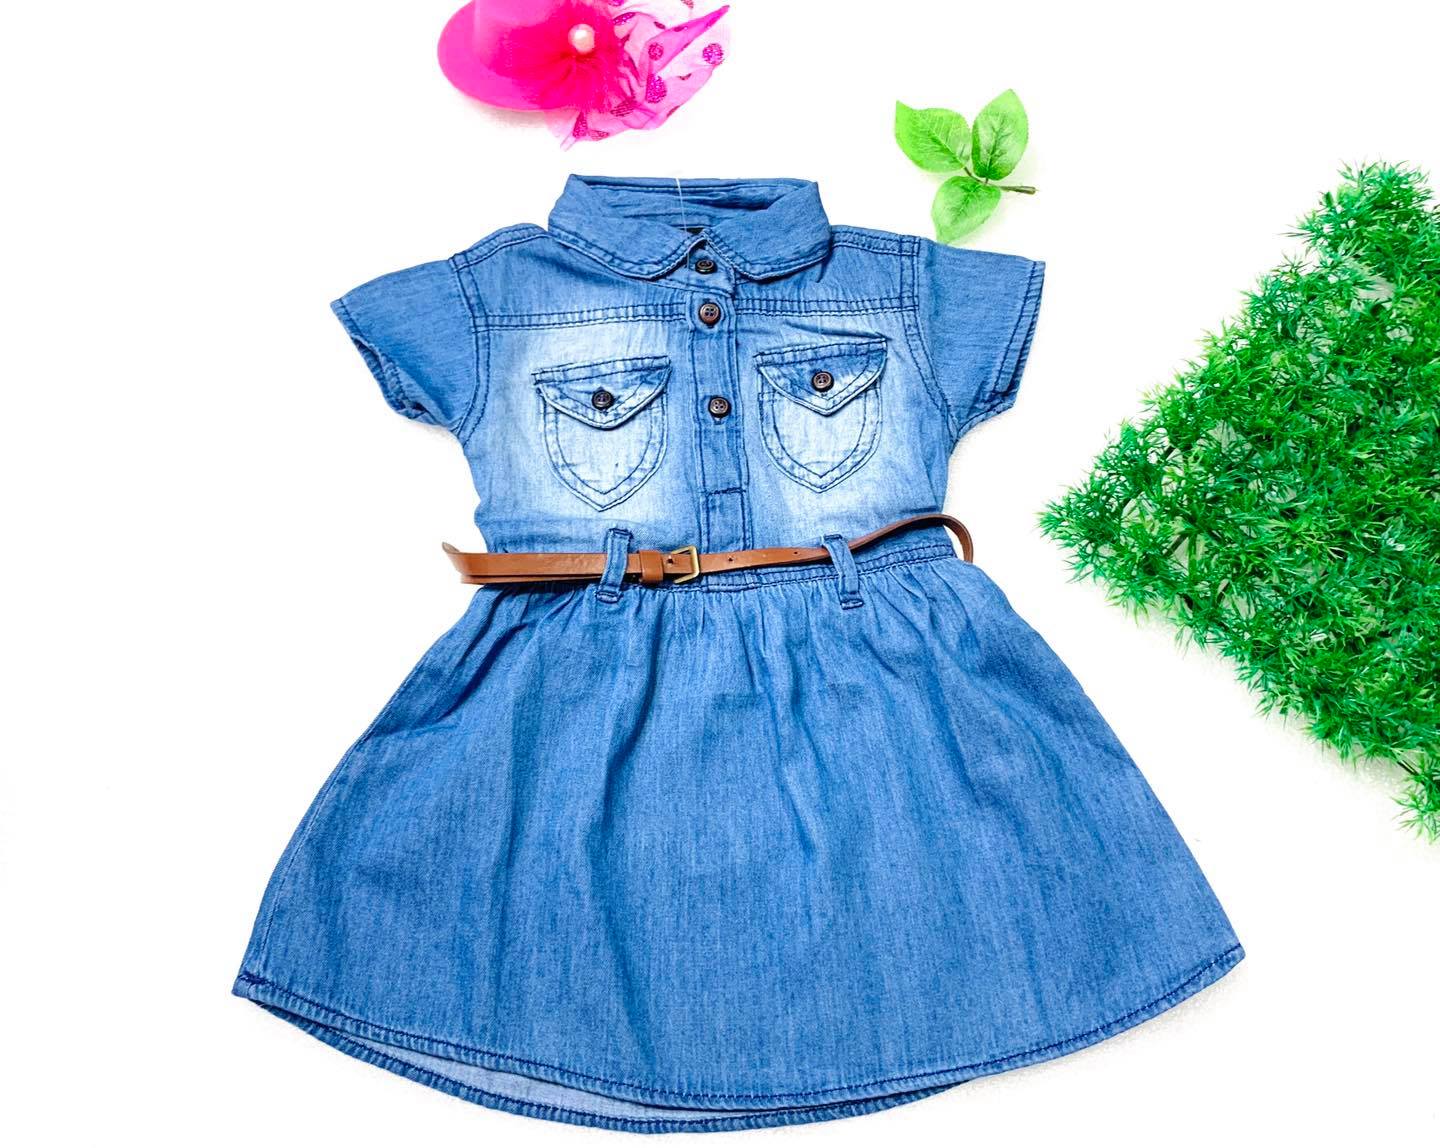 Buy Zara Kids Top Products Online at 